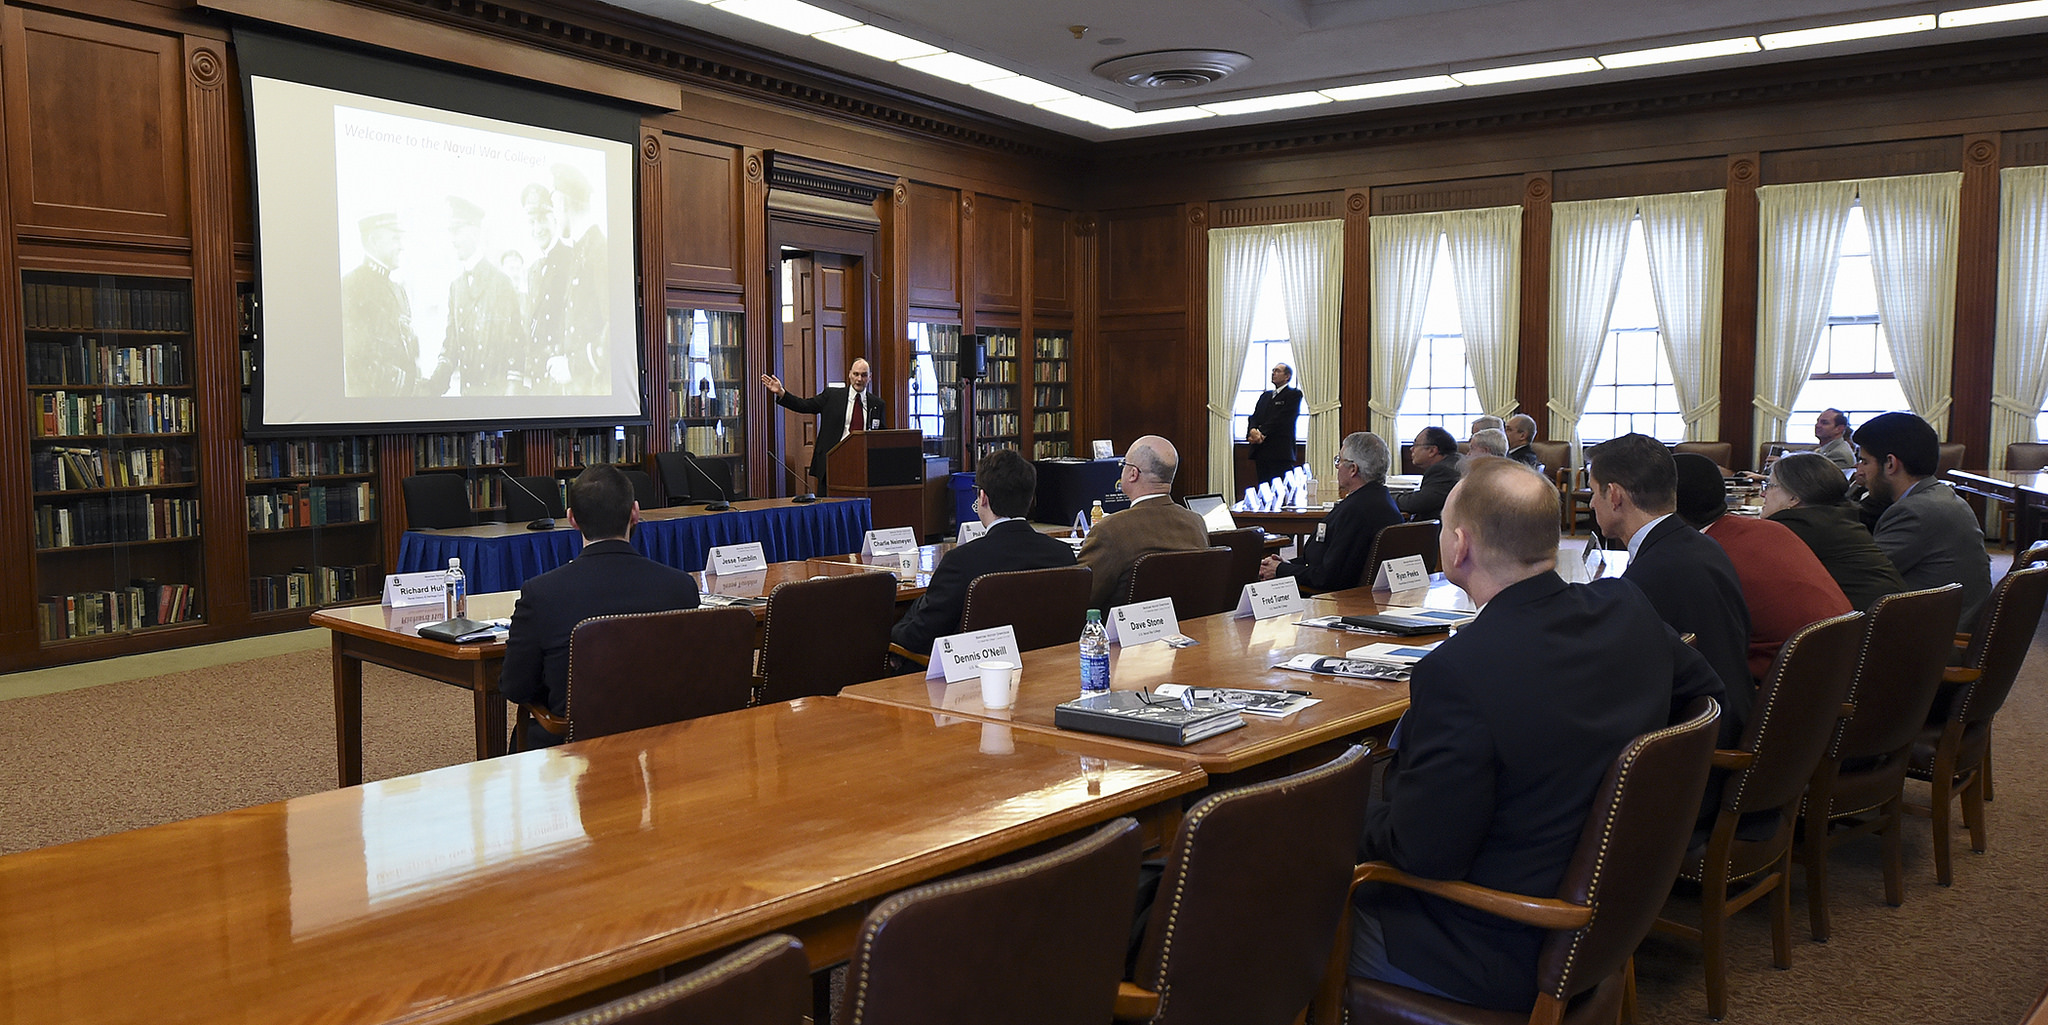  David Kohnen, professor of maritime history at the Center of Naval Warfare Studies and College of Operational and Strategic Leadership at U.S. Naval War College (NWC), provides opening remarks during the first Maritime History Symposium held at NWC in Newport, Rhode Island.